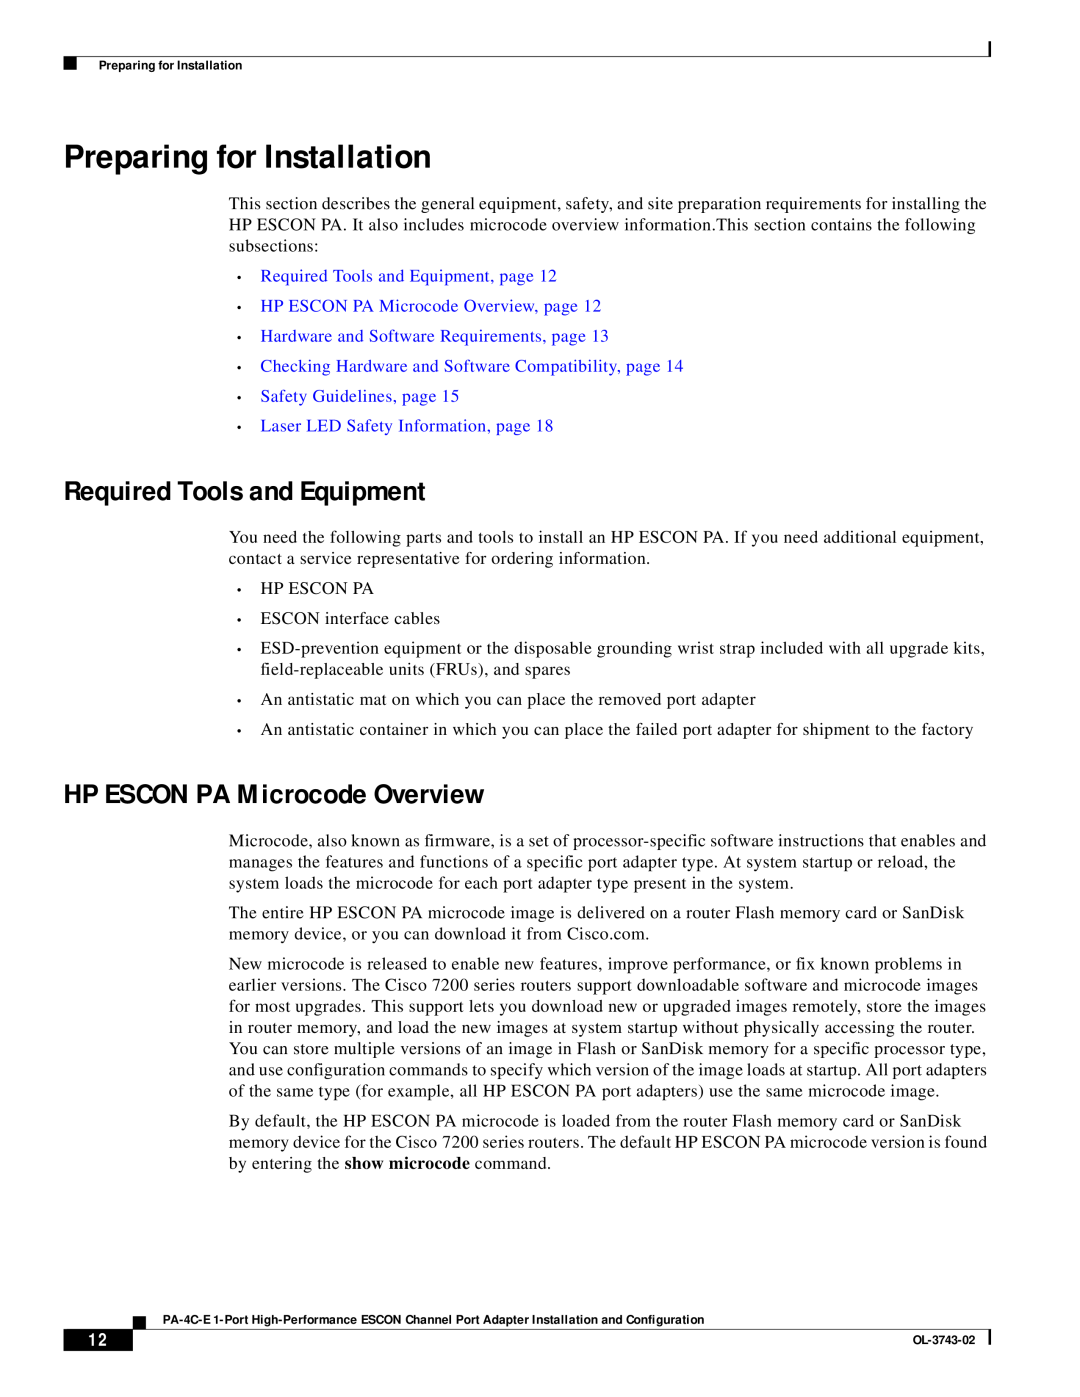 Cisco Systems PA-4C-E 1 manual Preparing for Installation, Required Tools and Equipment, HP ESCON PA Microcode Overview 